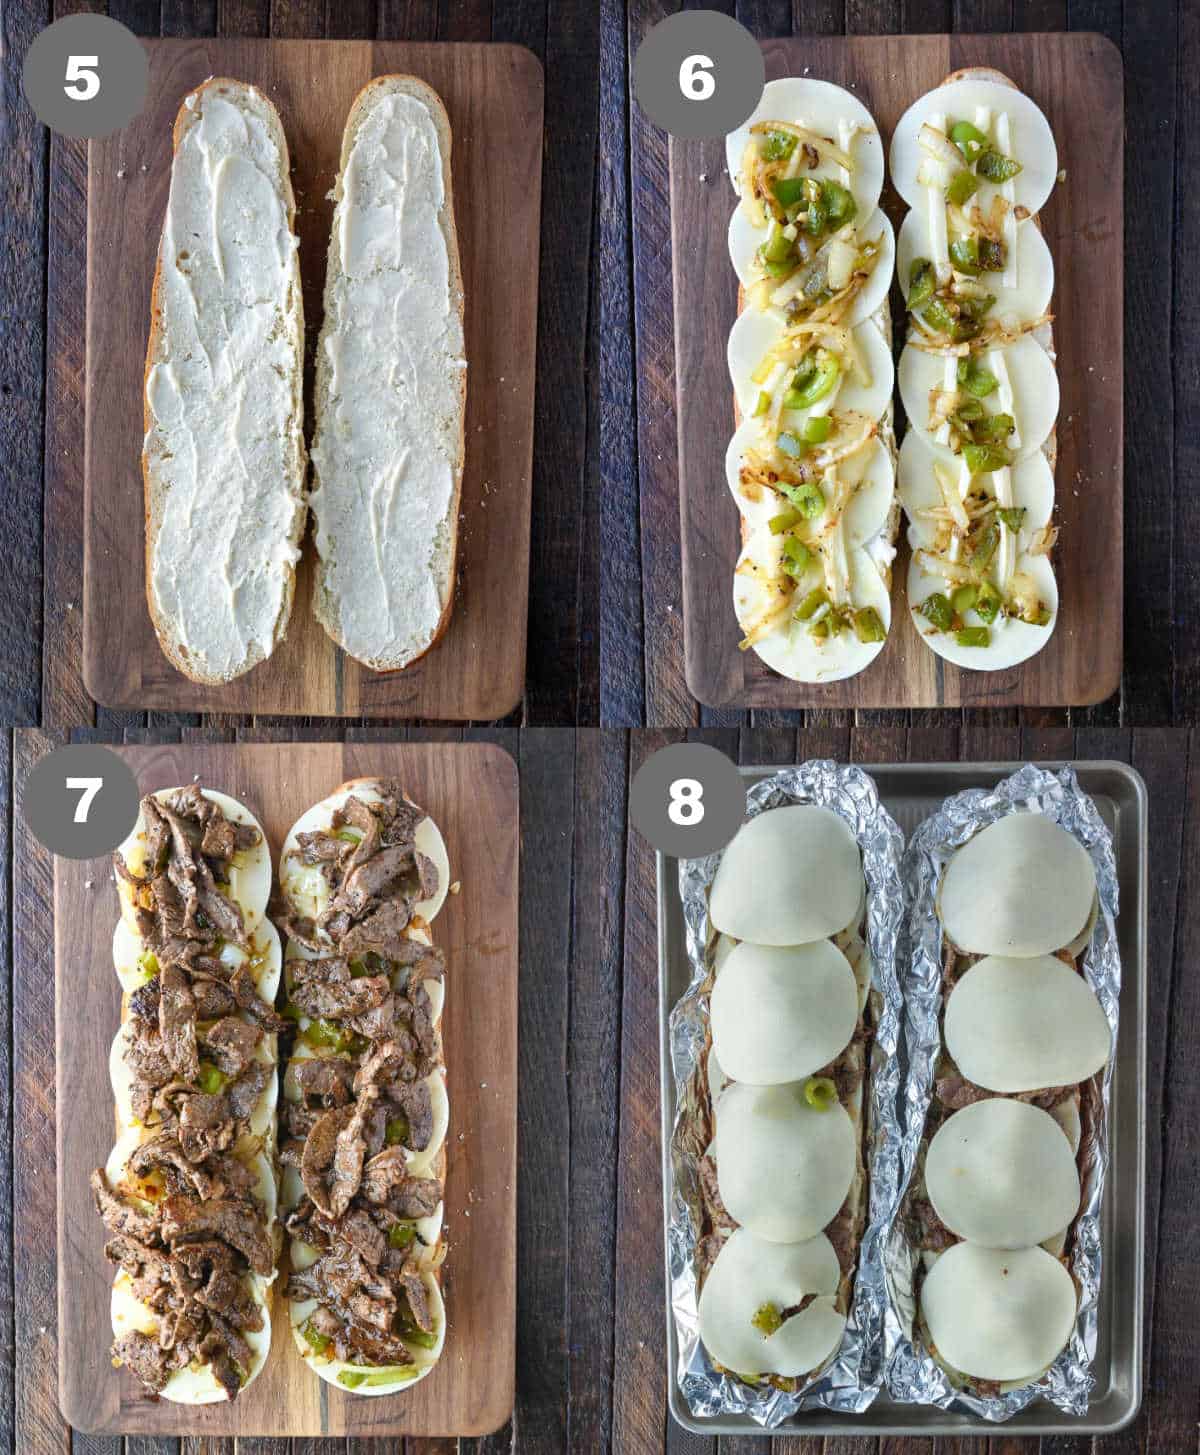 French bread with mayo and the toppings added on top.